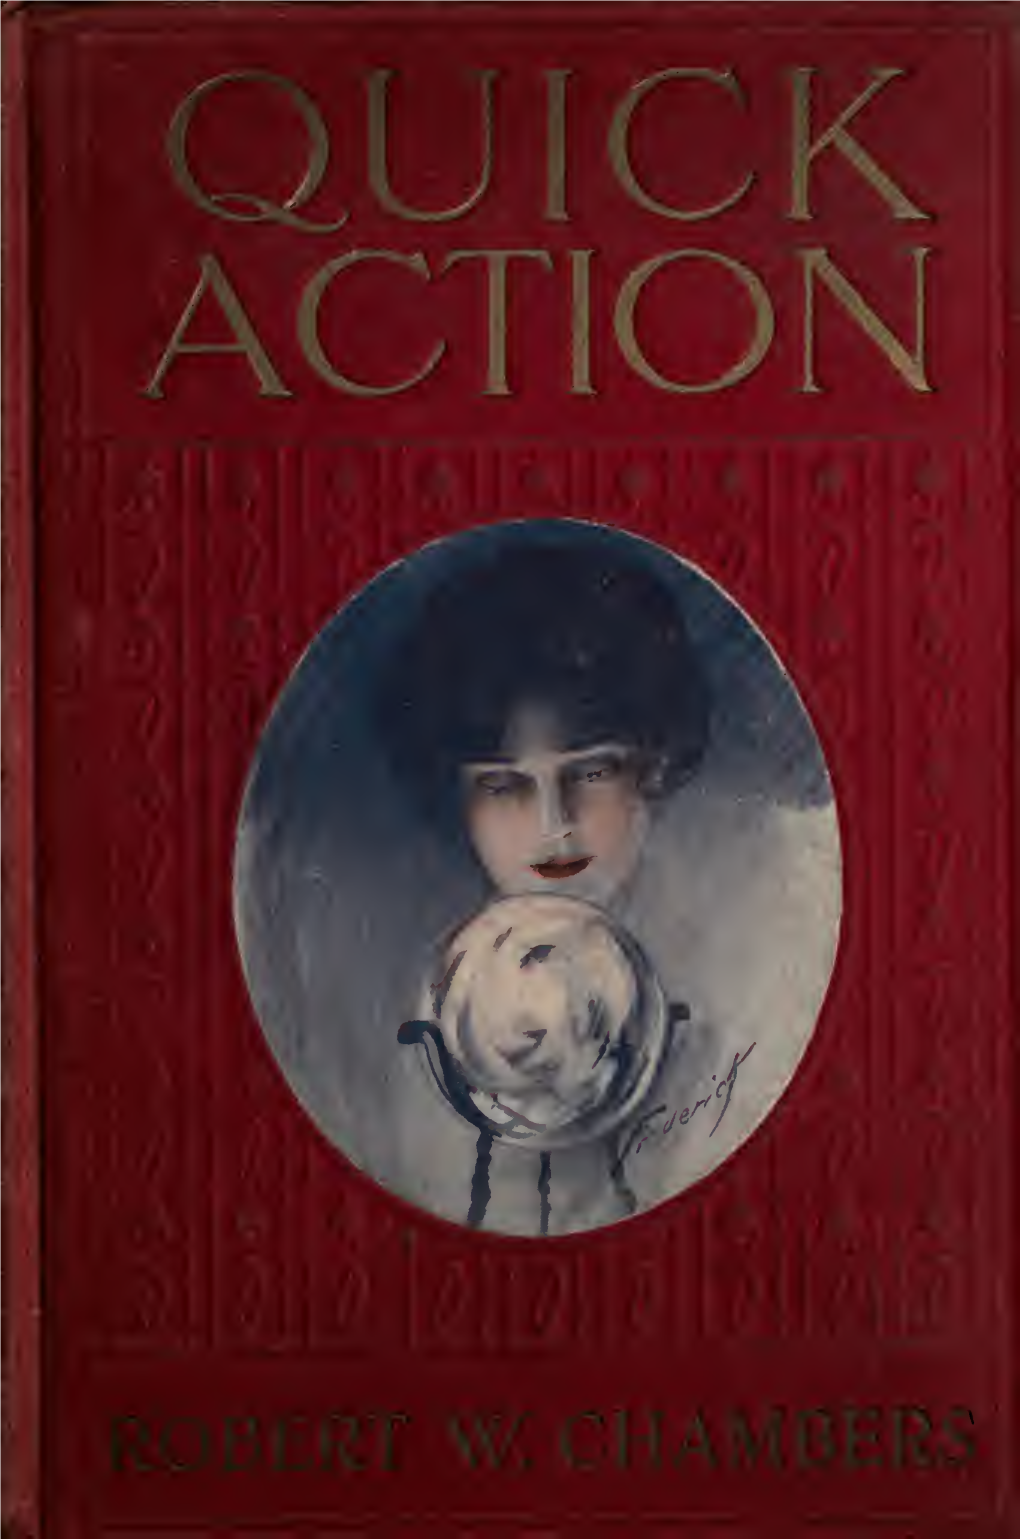 QUICK ACTION Novels by Robert W